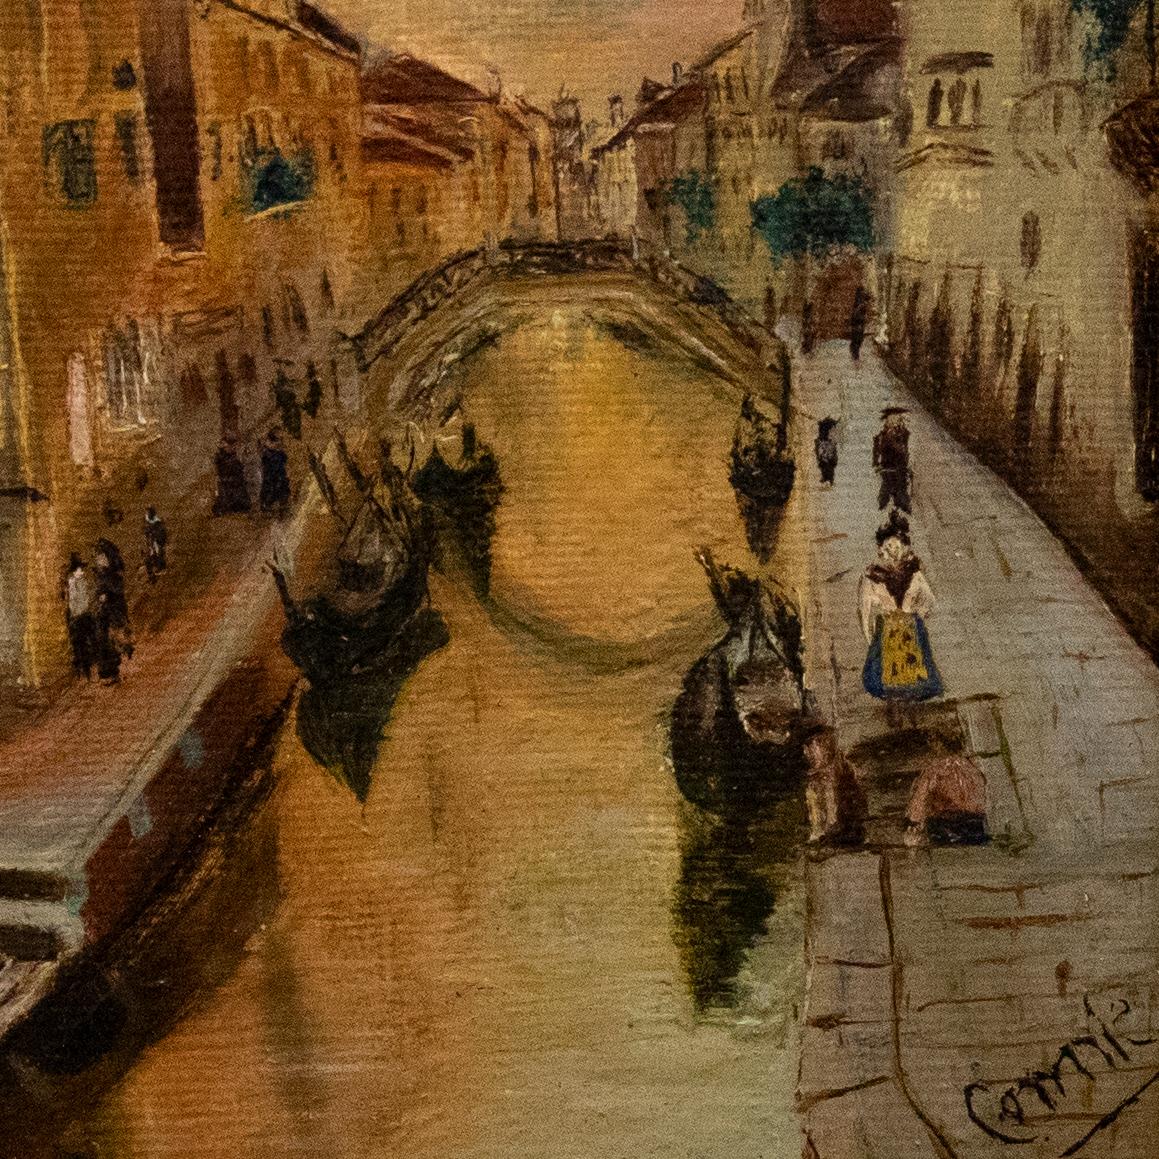 A delightful Venetian scene at sunset with figures walking the canal way. Well-presented in a miniature gilt-effect frame with internal slip. Indistinctly signed. On canvas laid to board.